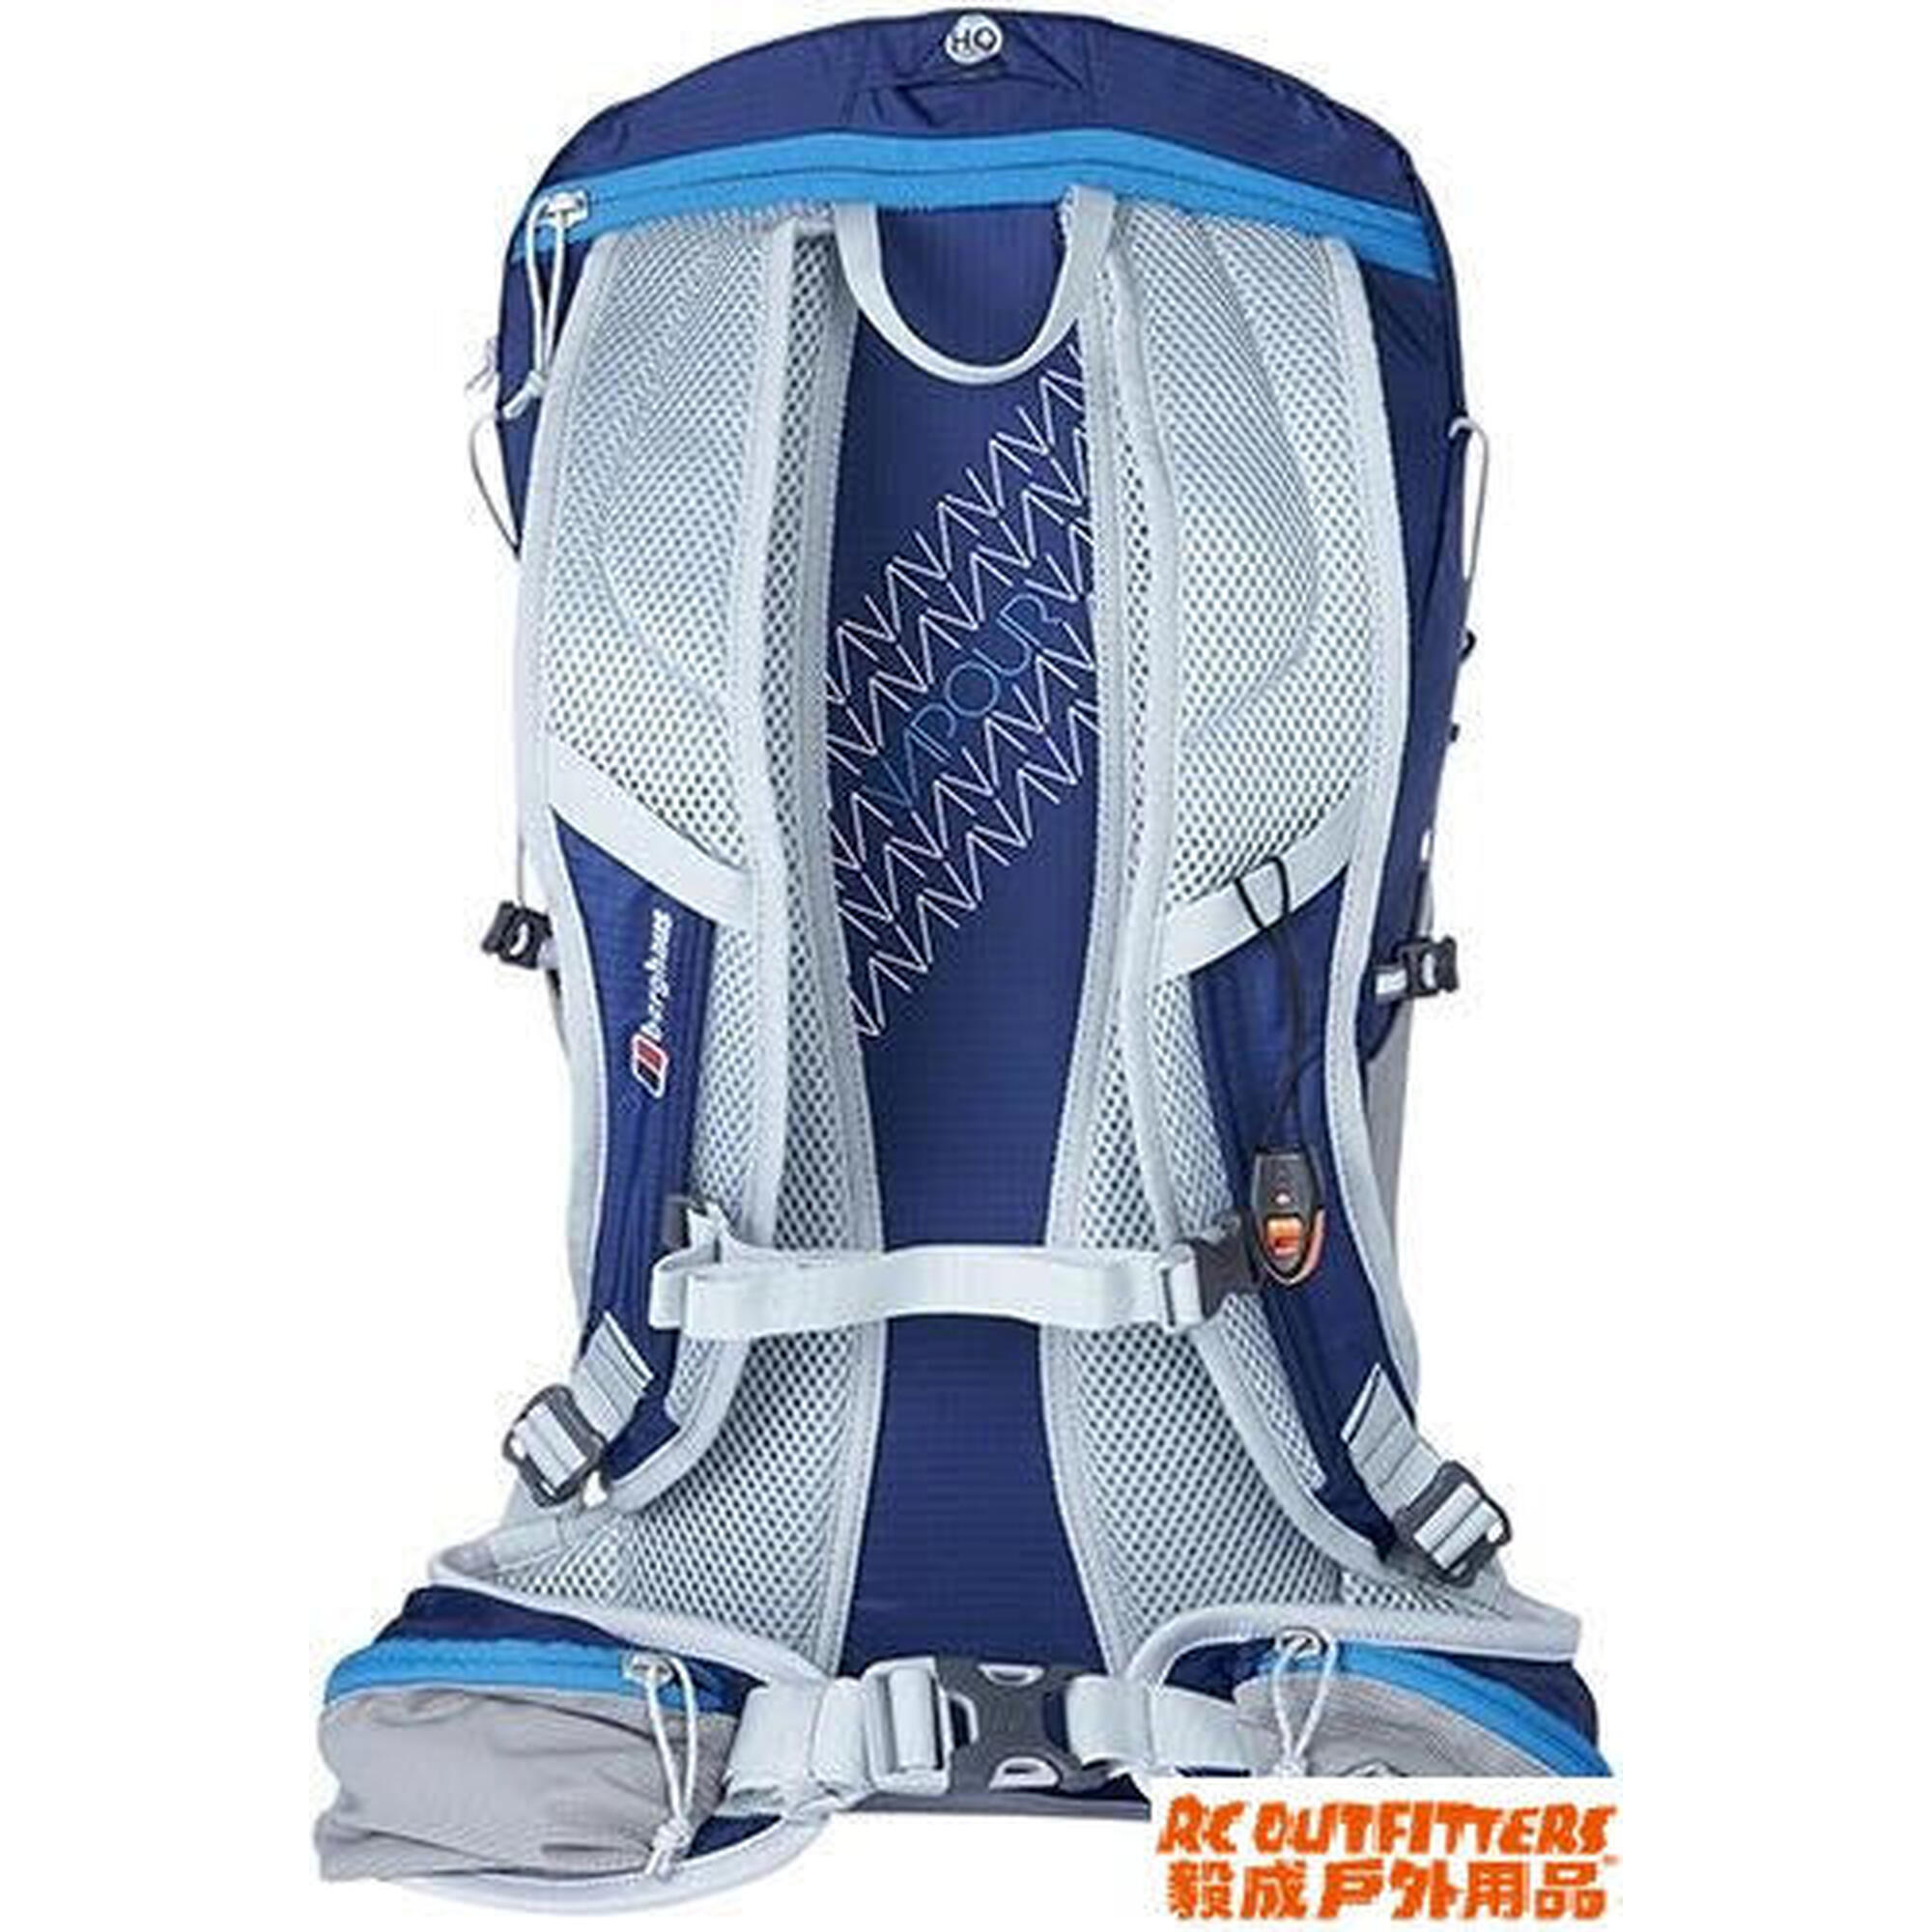 Vapour 15 Light Weight Hiking Backpack 15L - Blue